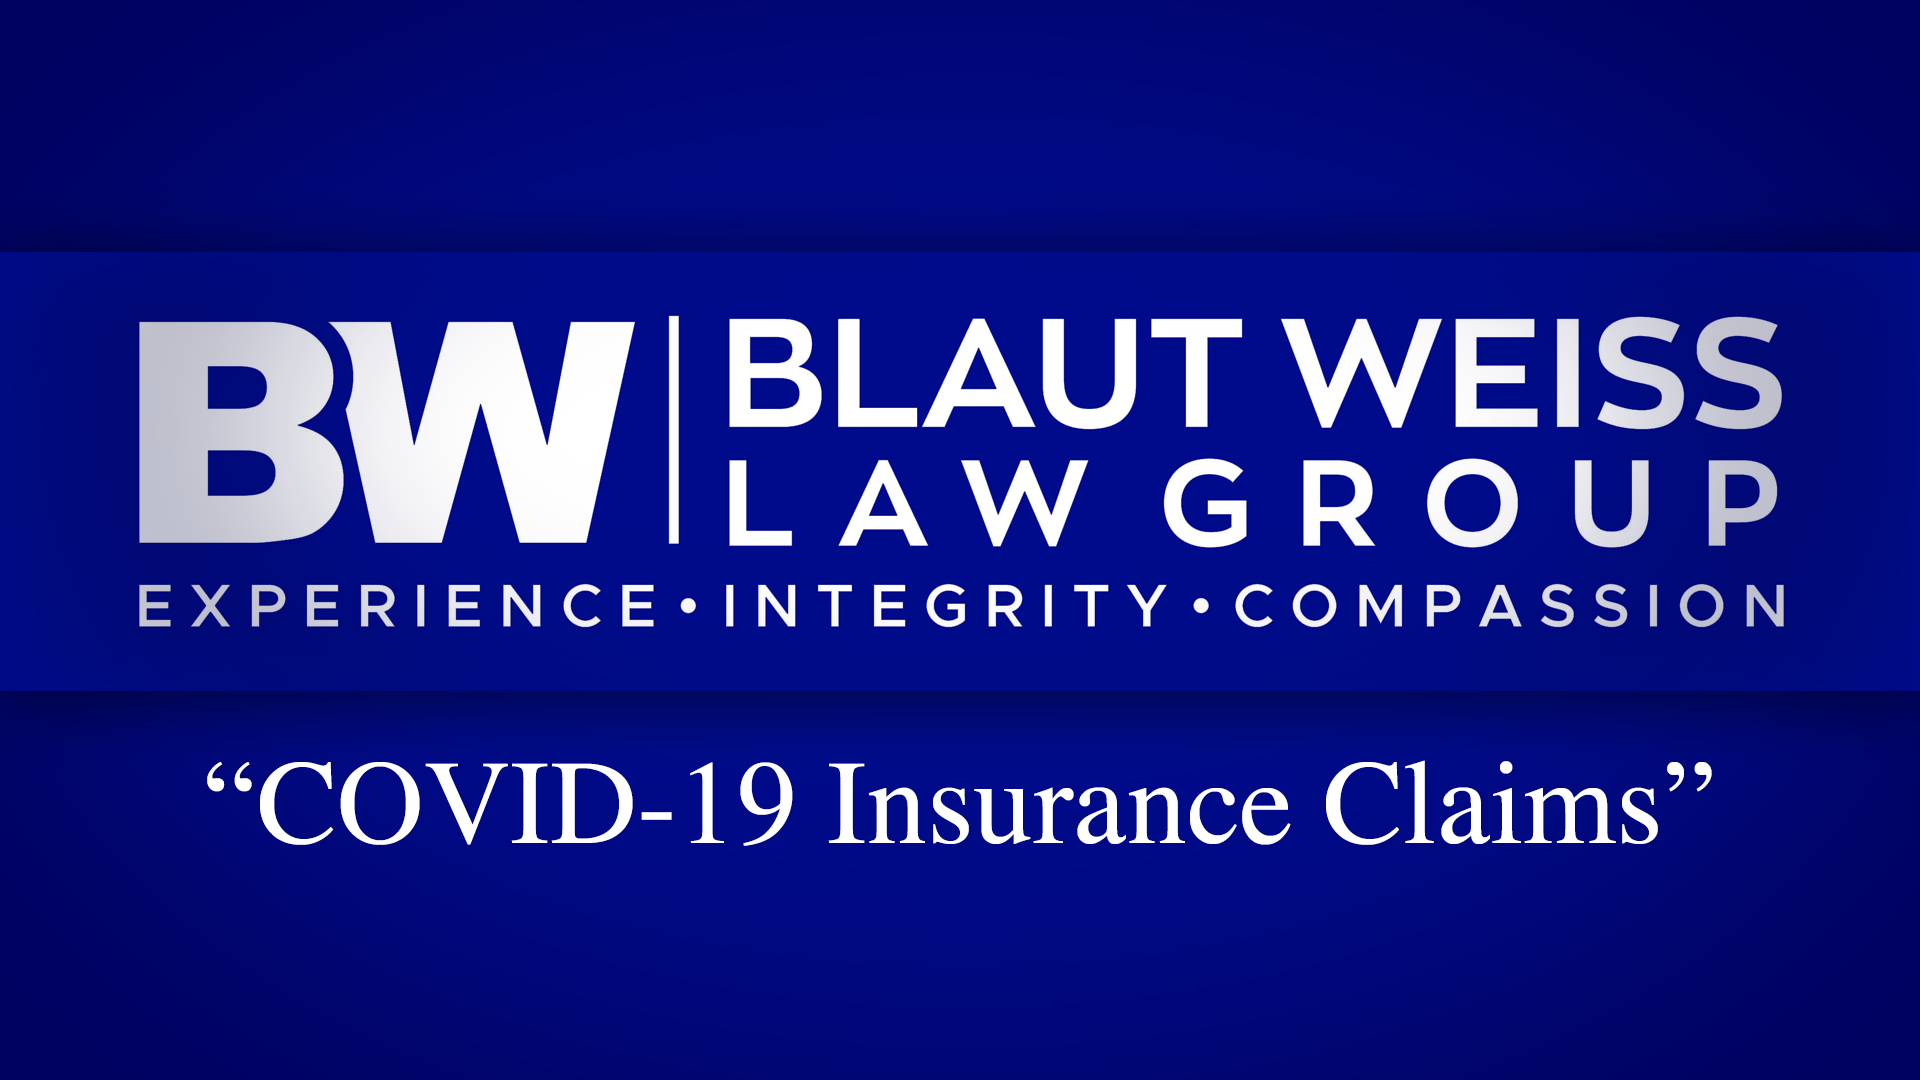 Introducing The Blaut Weiss Law Group YouTube Channel